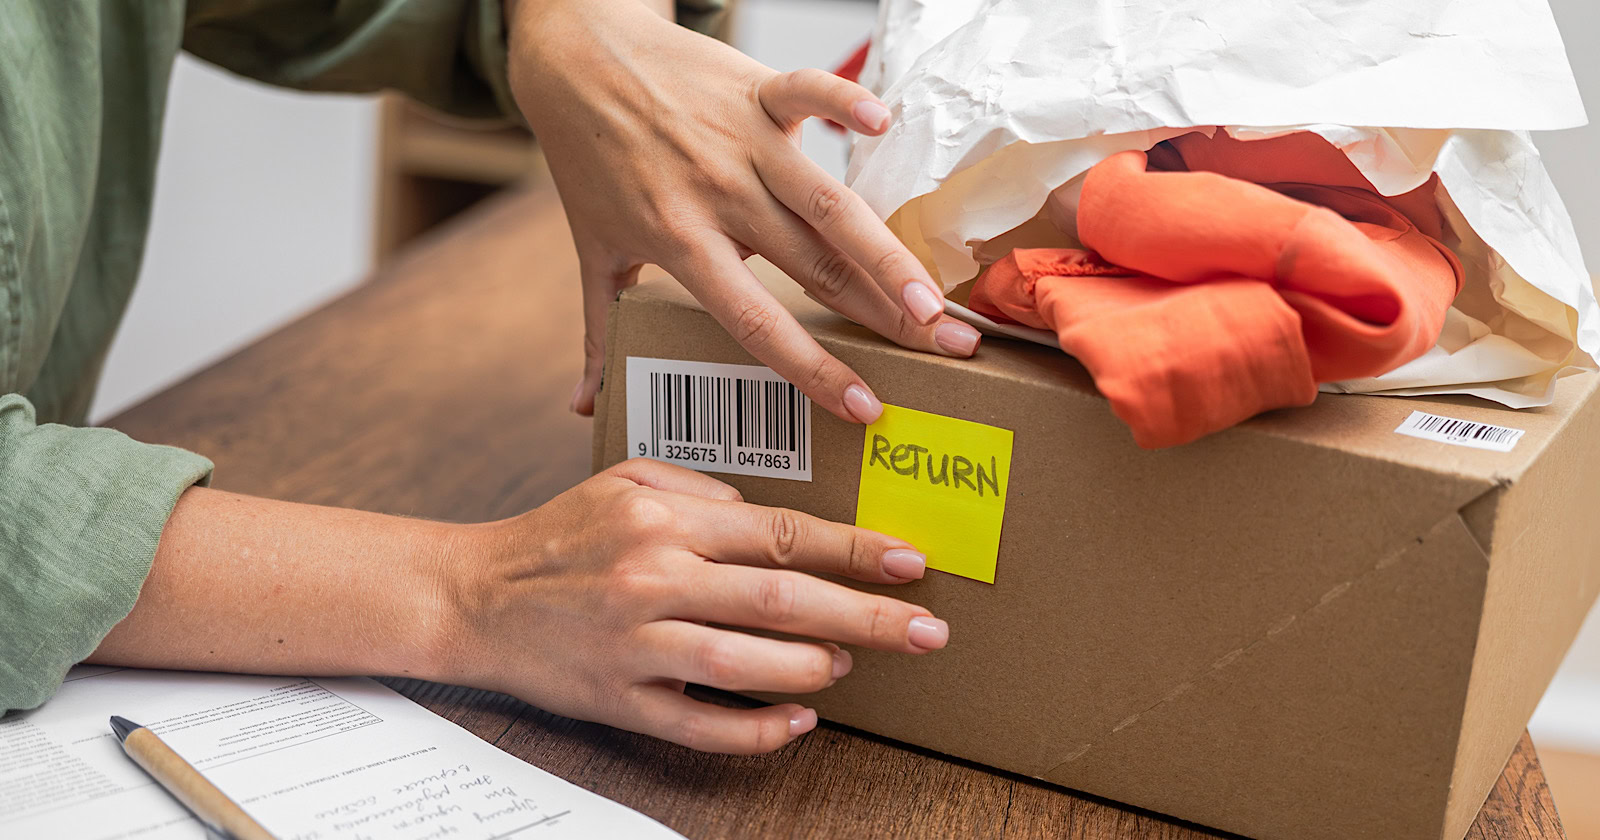 woman online shopper affixes a barcode sticker to a cardboard box, marking it for return and refund